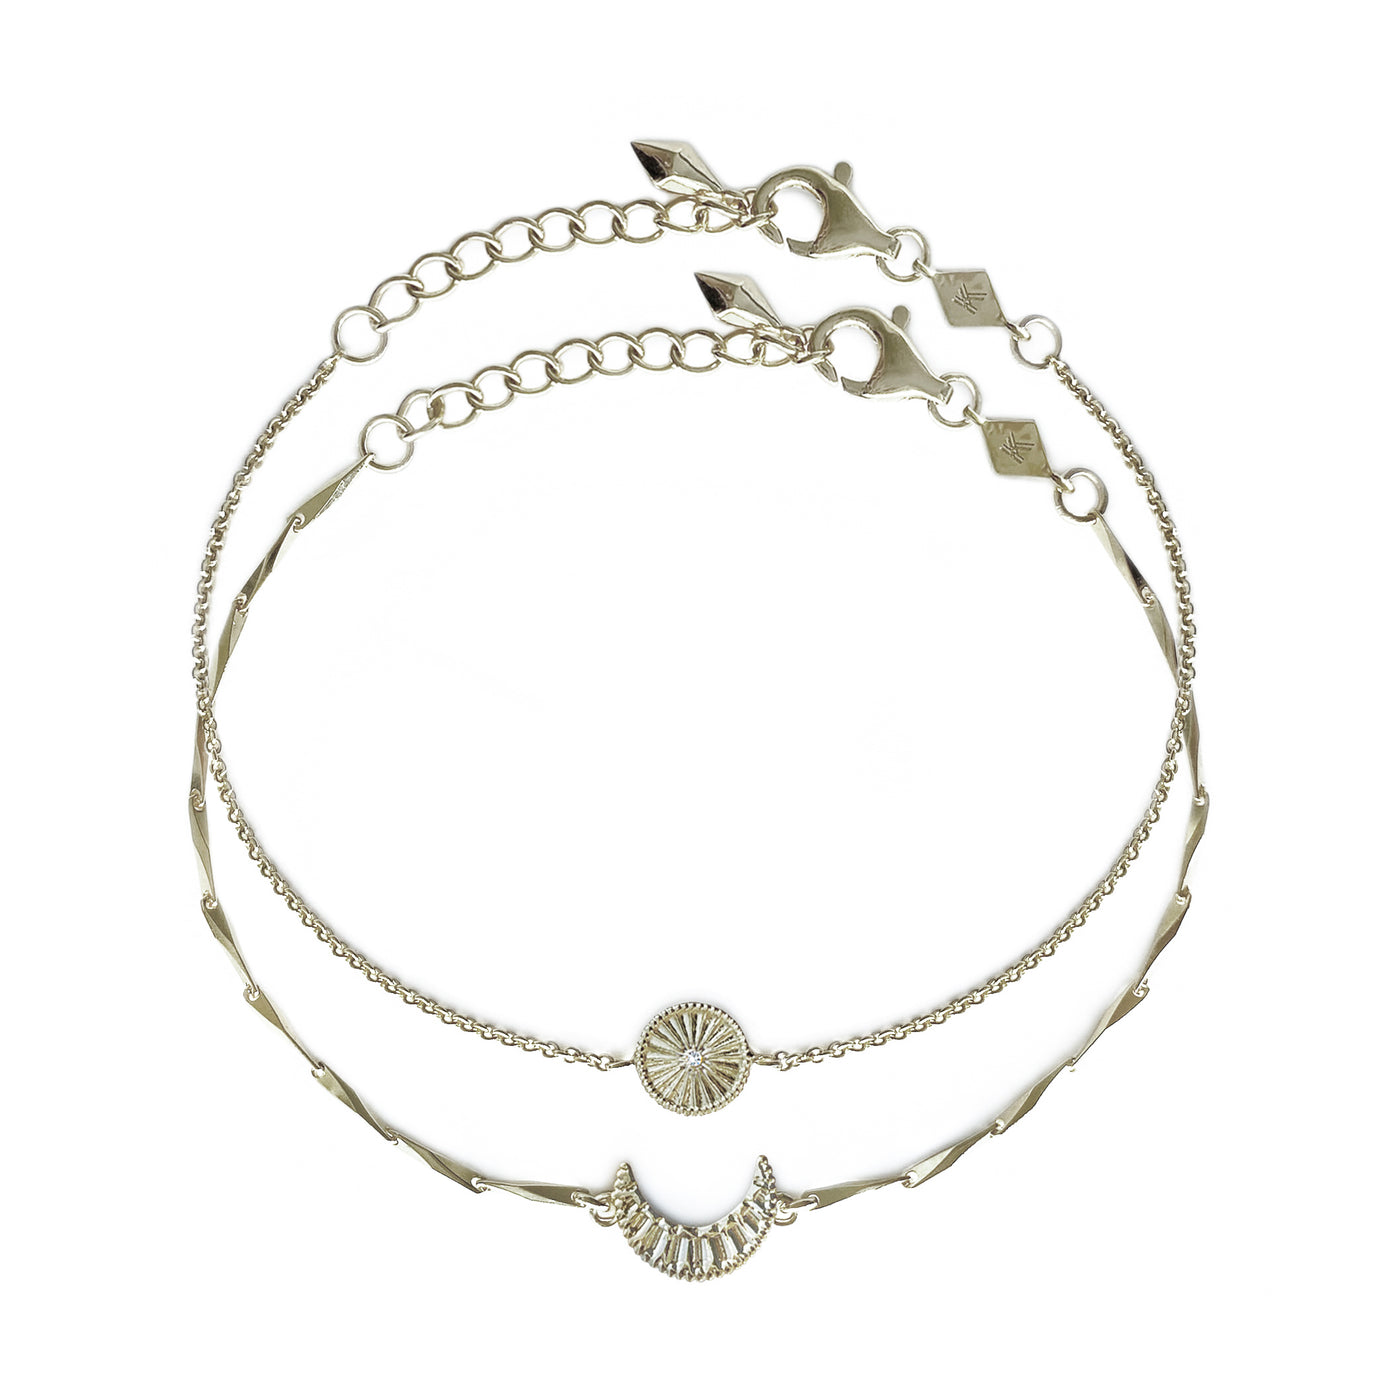 Sterling silver engraved set of 2 delicate sun and moon bracelets with CZ crystals